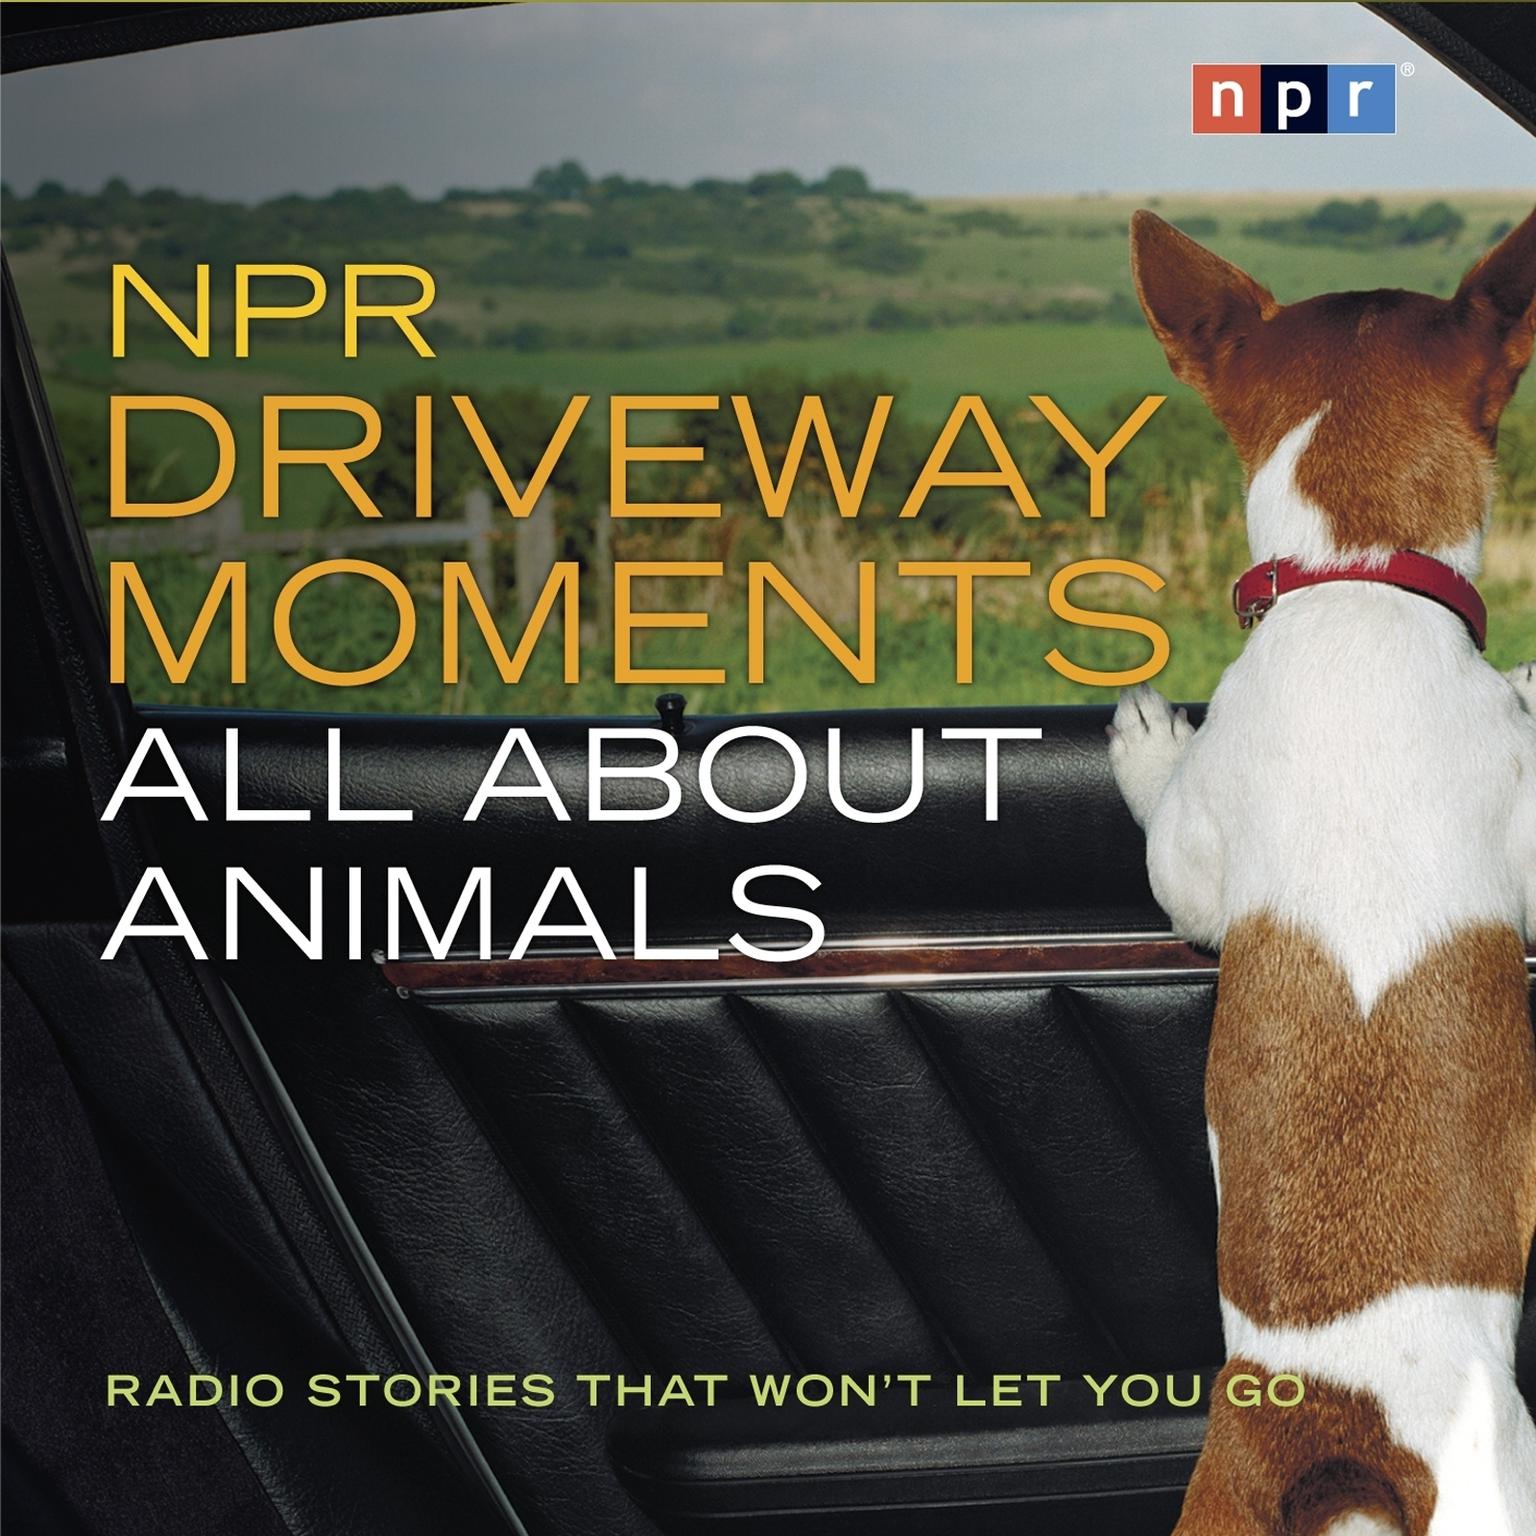 NPR Driveway Moments All About Animals: Radio Stories That Wont Let You Go Audiobook, by NPR